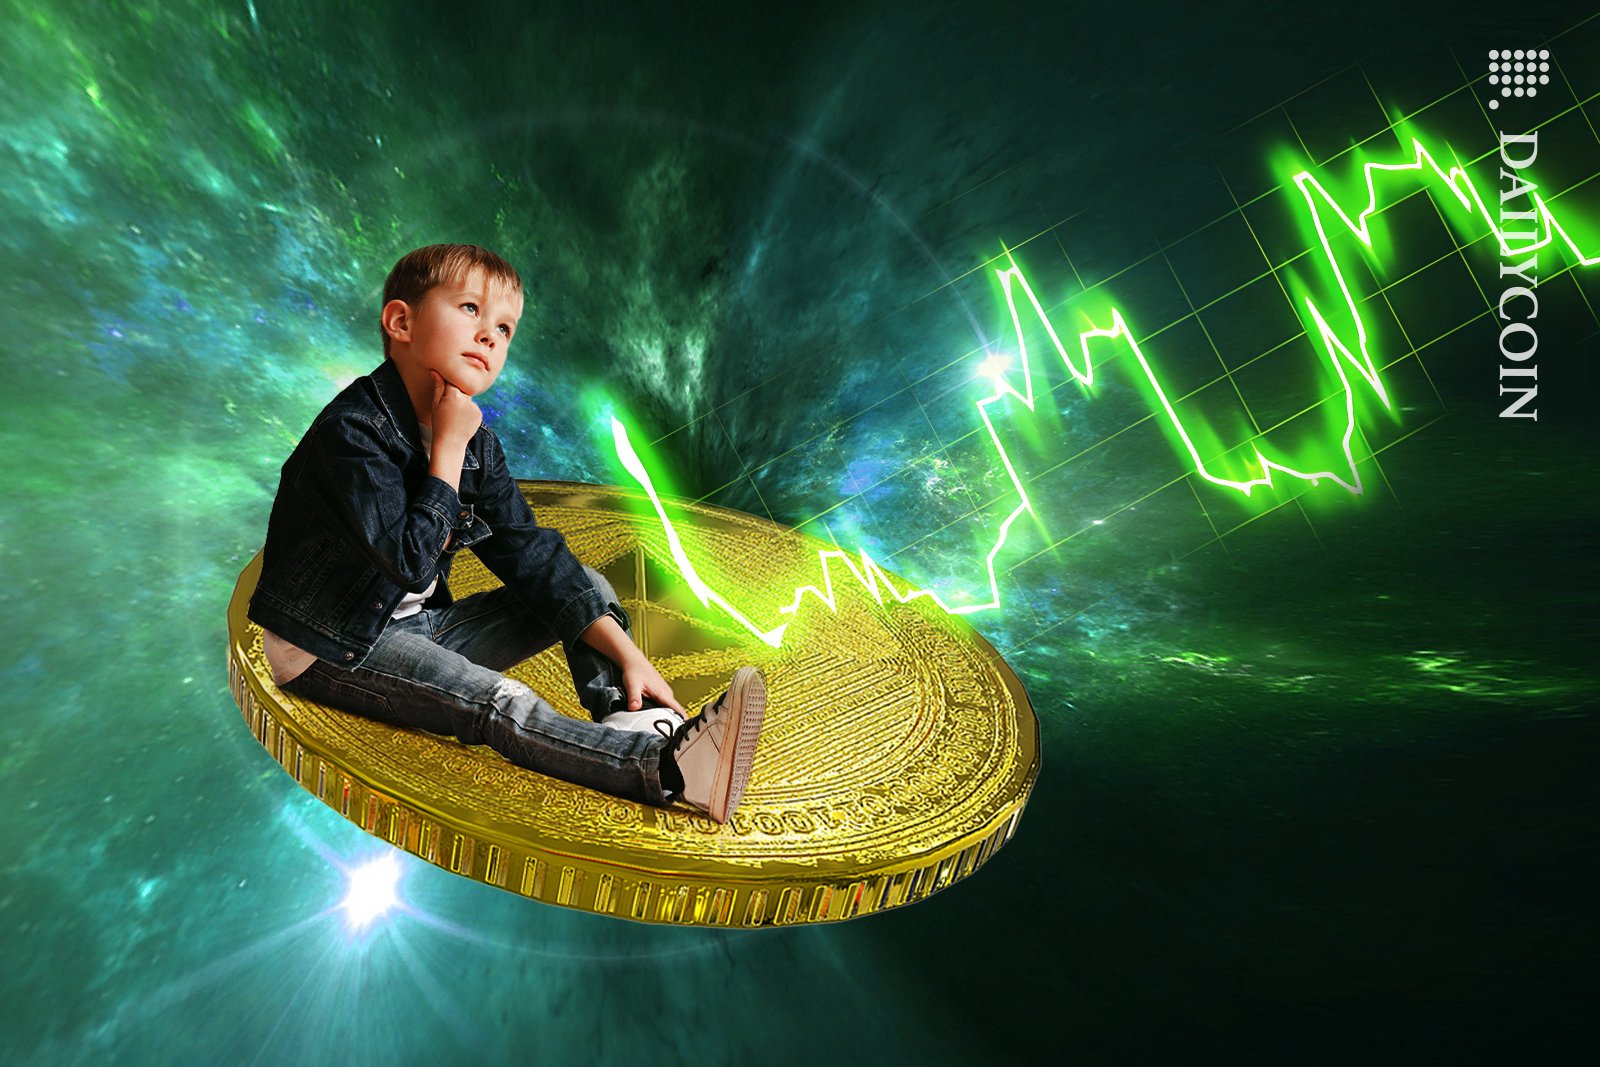 Boy sitting on a ETH coin in space, watching the green price chart go up.